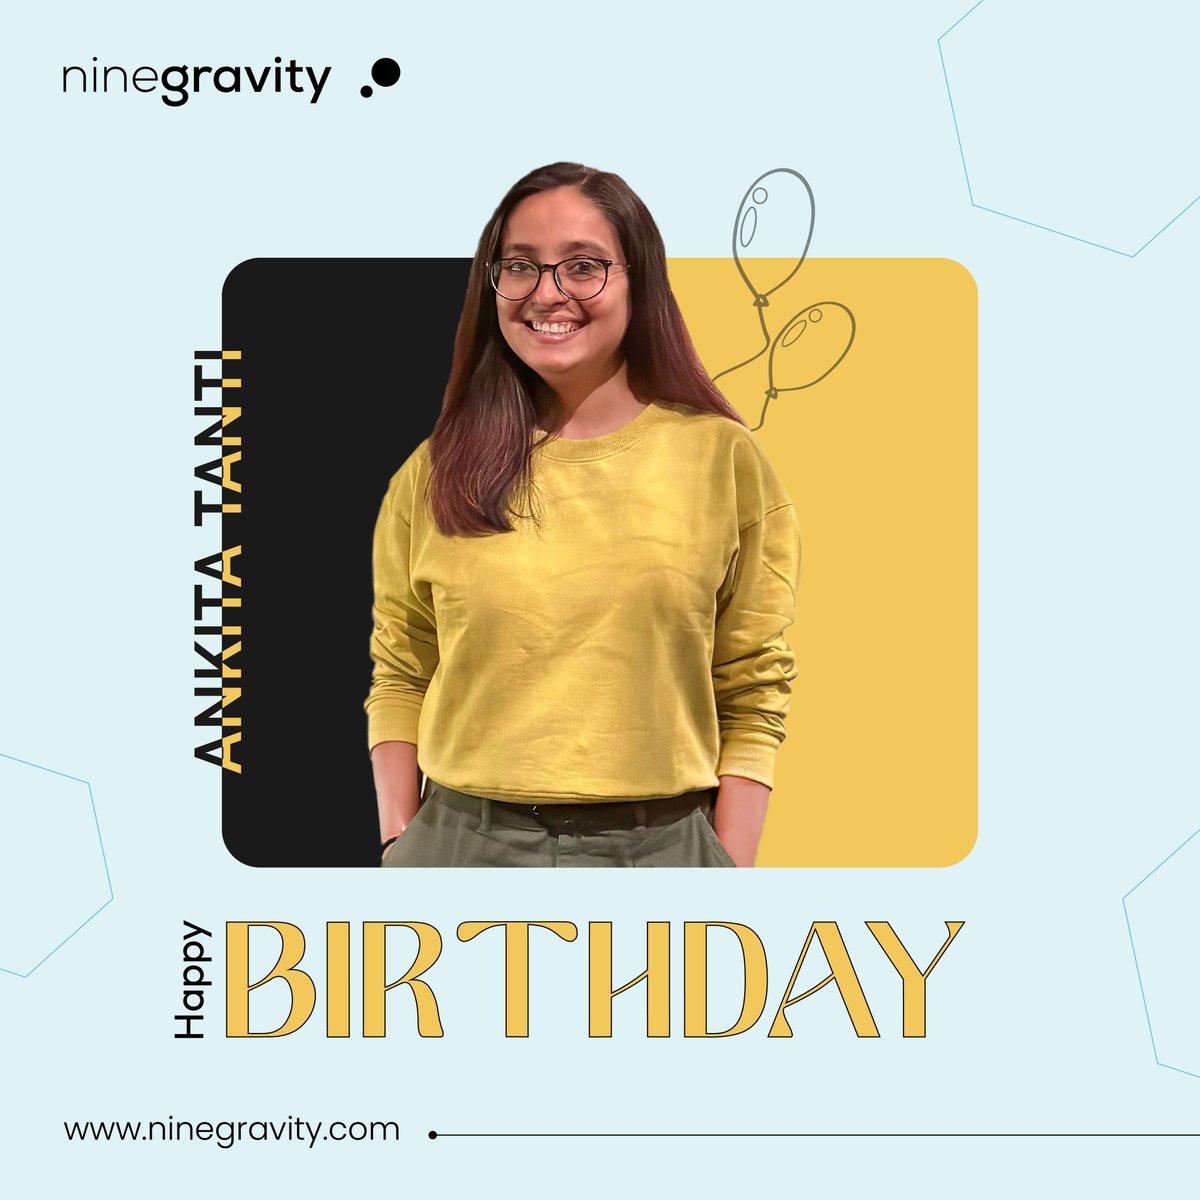 Happy Birthday, Ankita! 🎂 May your day be filled with laughter, love, and the sweetest surprises. Here's to a year ahead filled with success and fulfillment! 🎈🎁

#NineGravity #HappyBirthday #BirthdayCelebrations #TeamCelebration